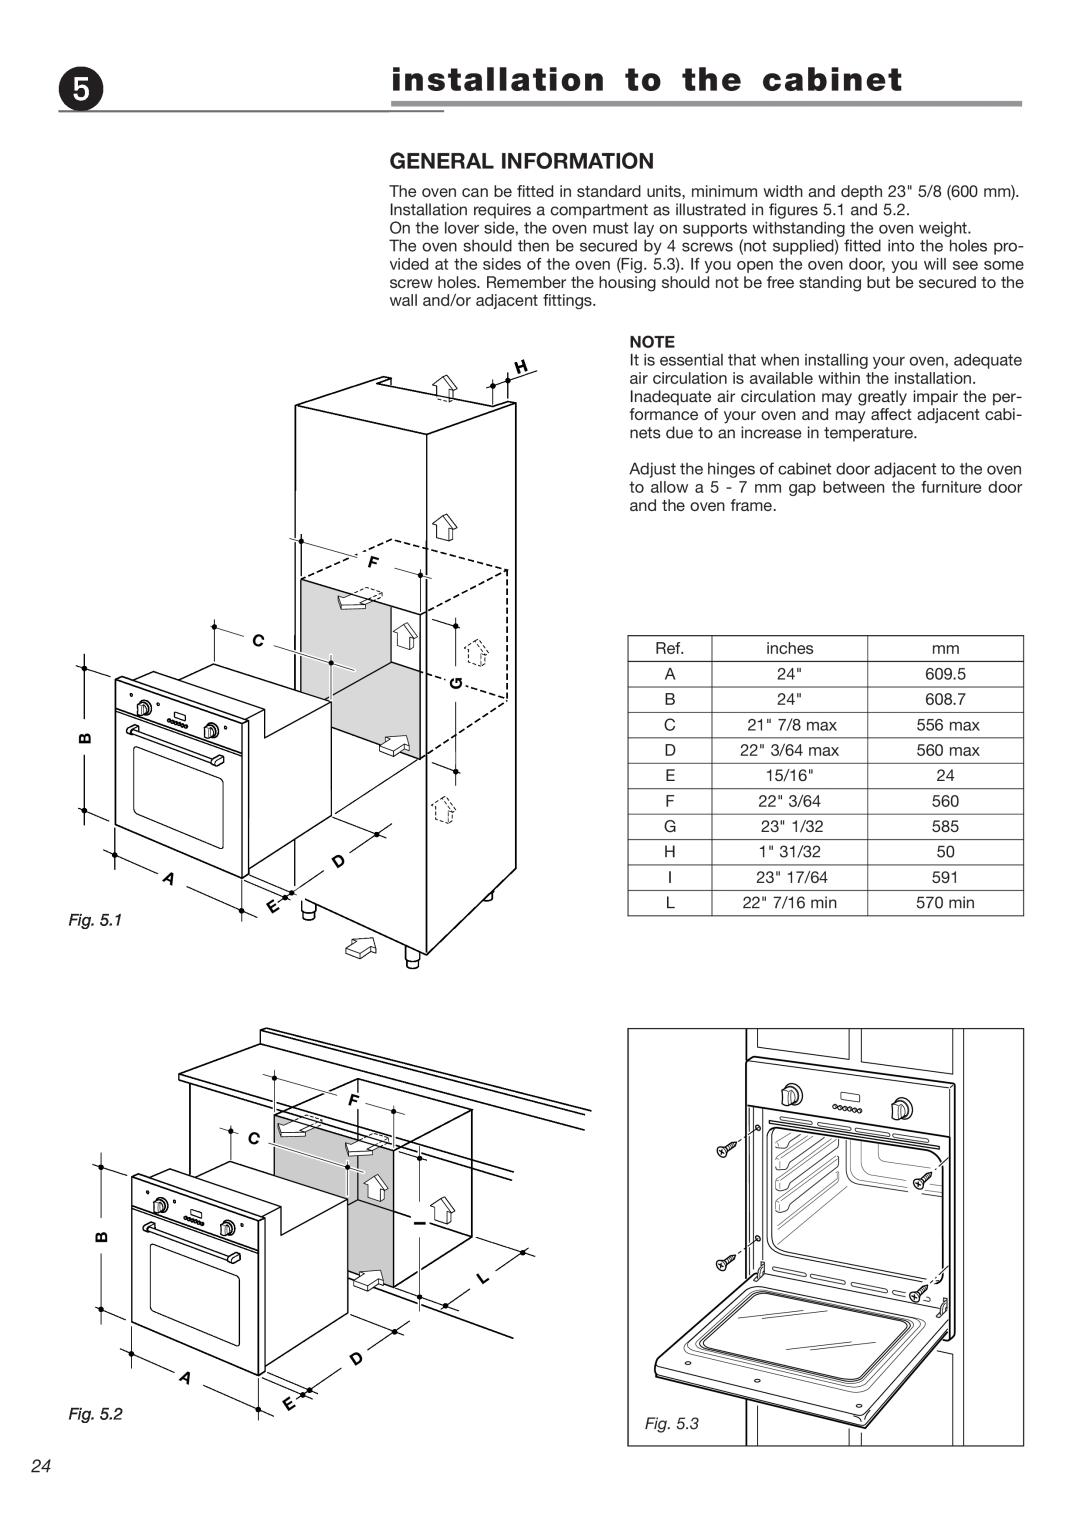 DeLonghi 24 SS, 24 E warranty installation to the cabinet, General Information 